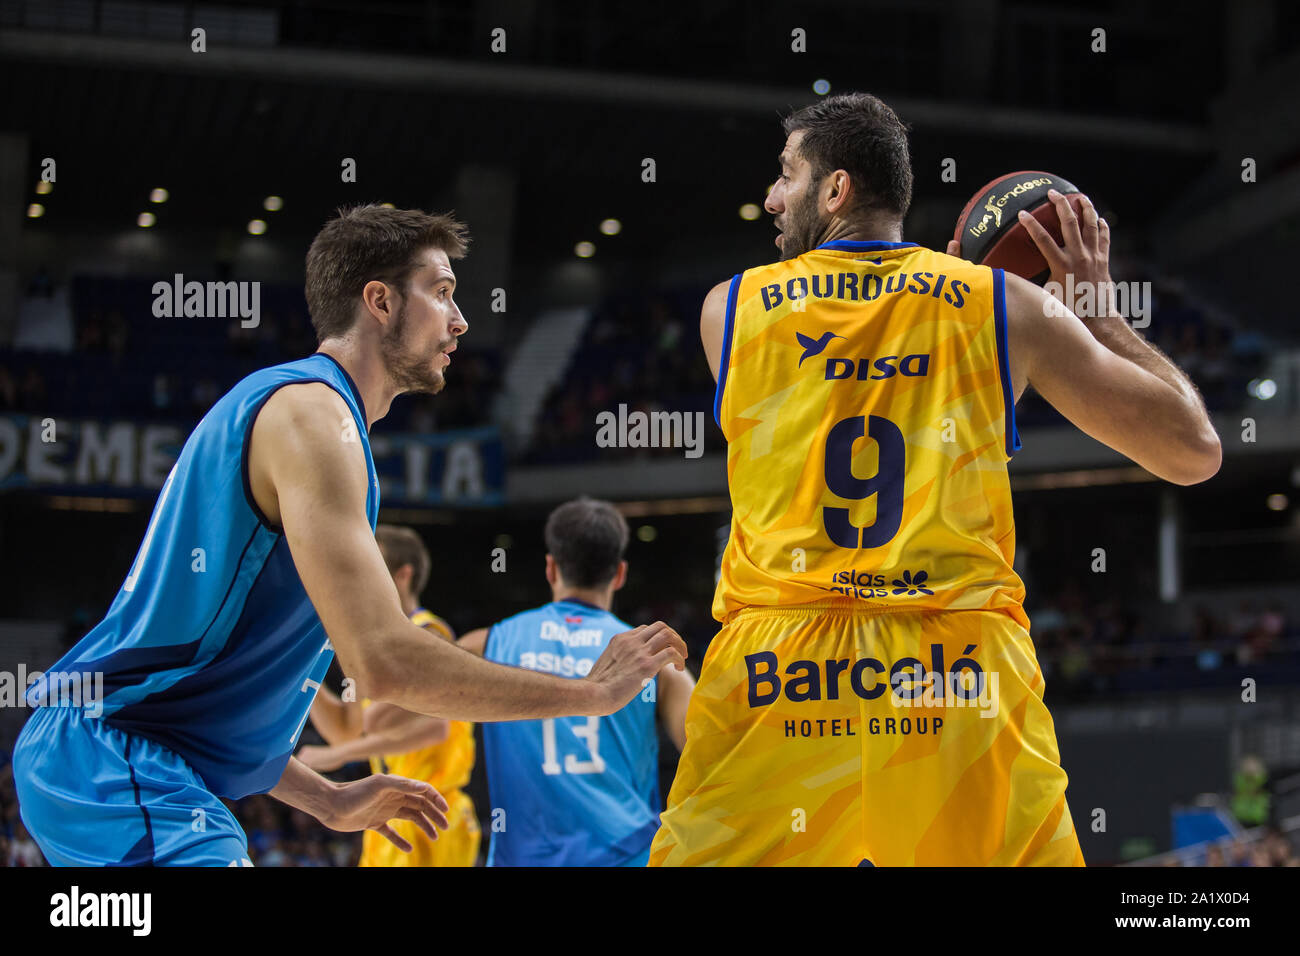 Ioannis Bourousis High Resolution Stock Photography and Images - Alamy